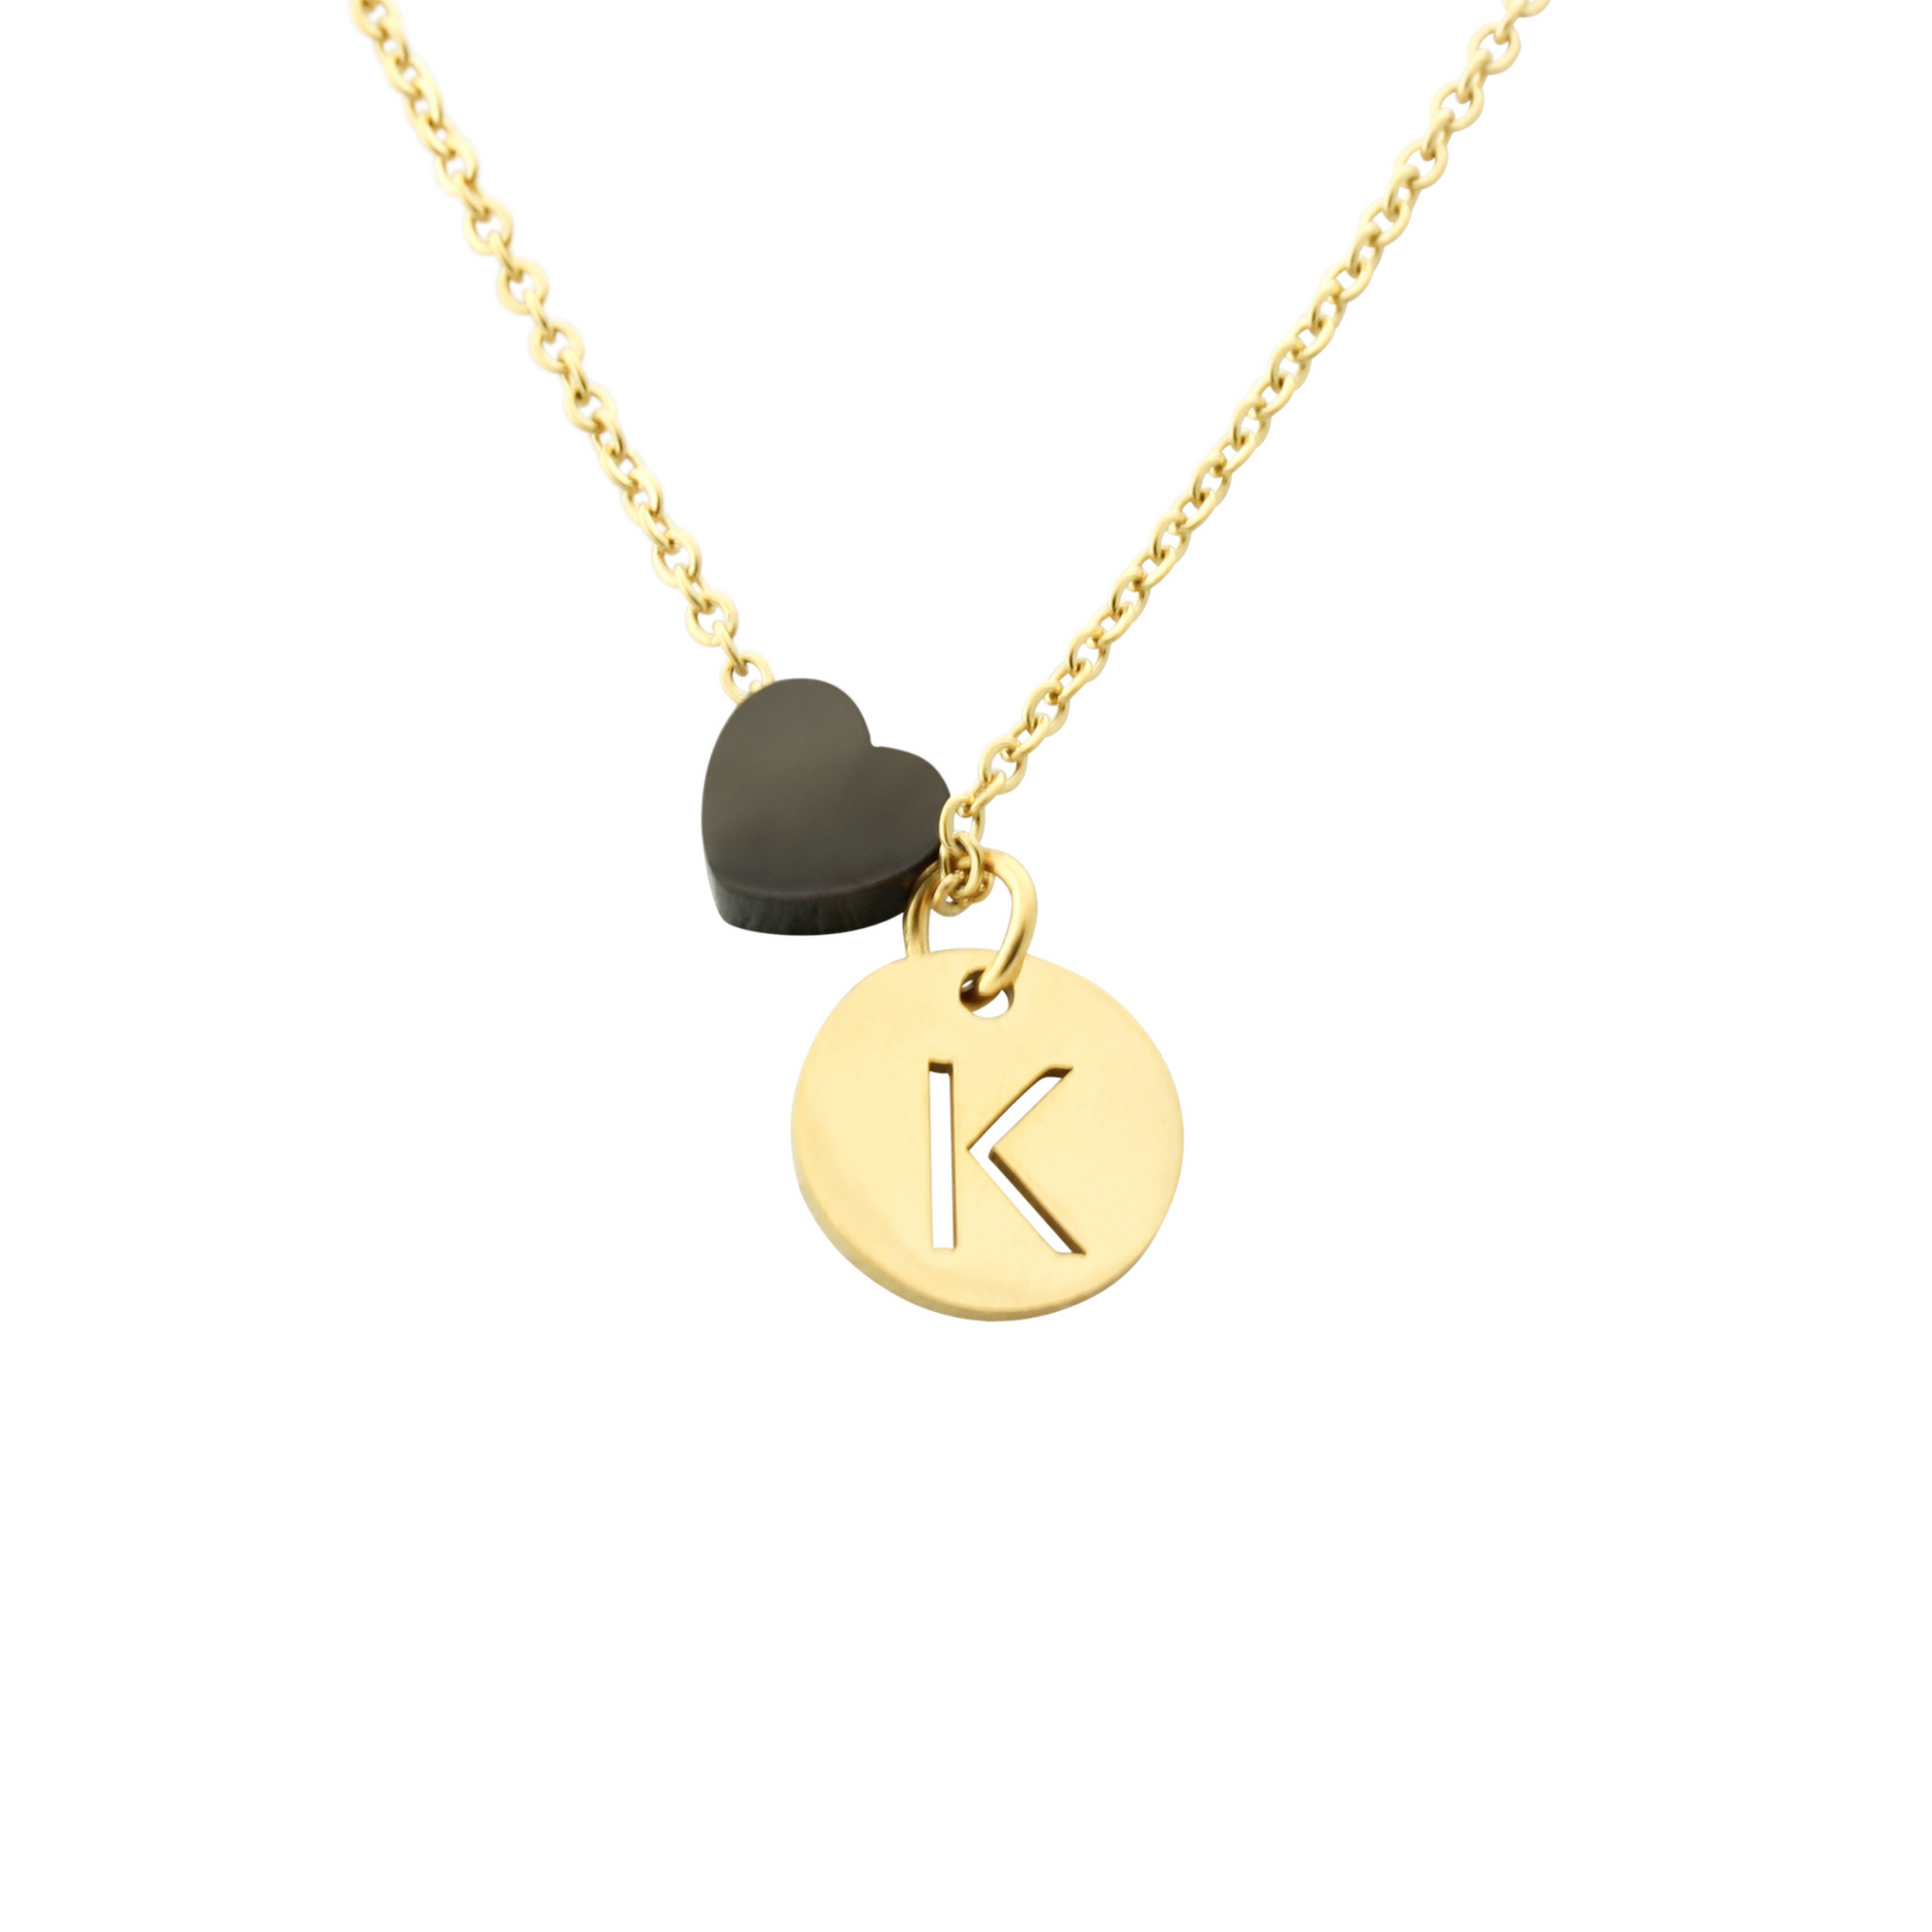 "Le Délice" Waterproof Personalized Initial Necklace with Heart - Gold/Black